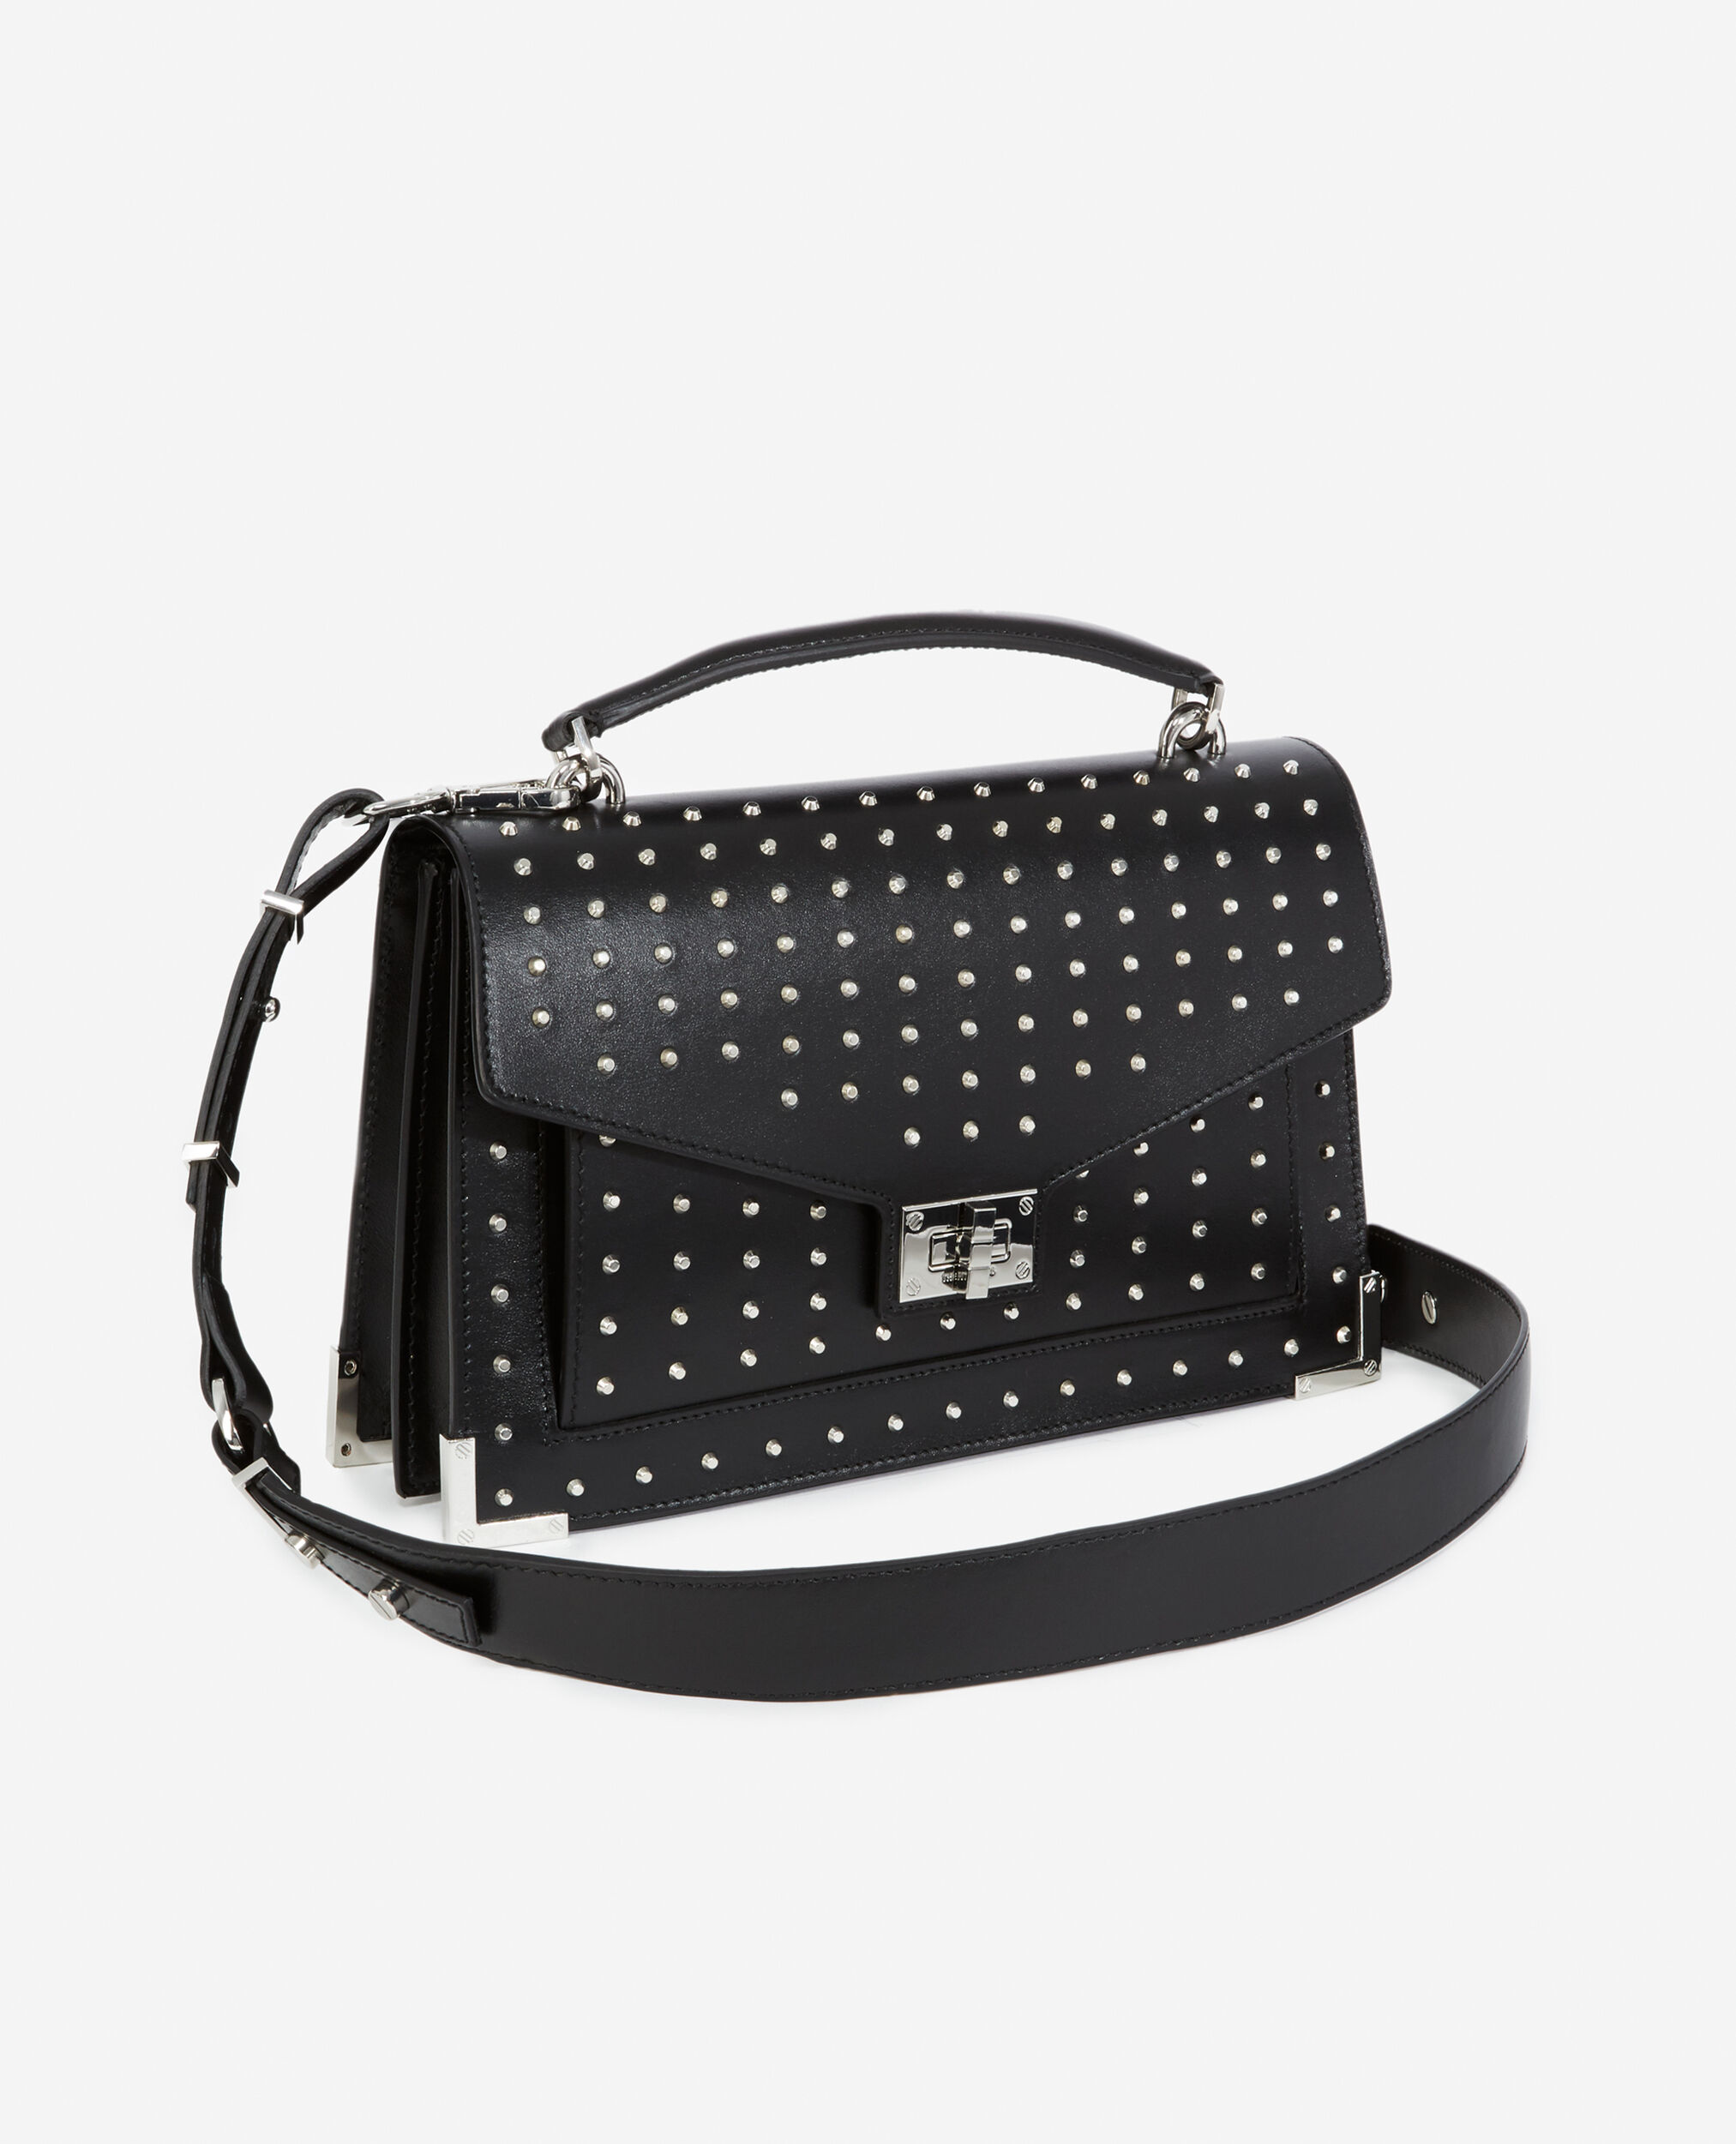 Studded Medium Emily bag in smooth leather, BLACK / SILVER, hi-res image number null